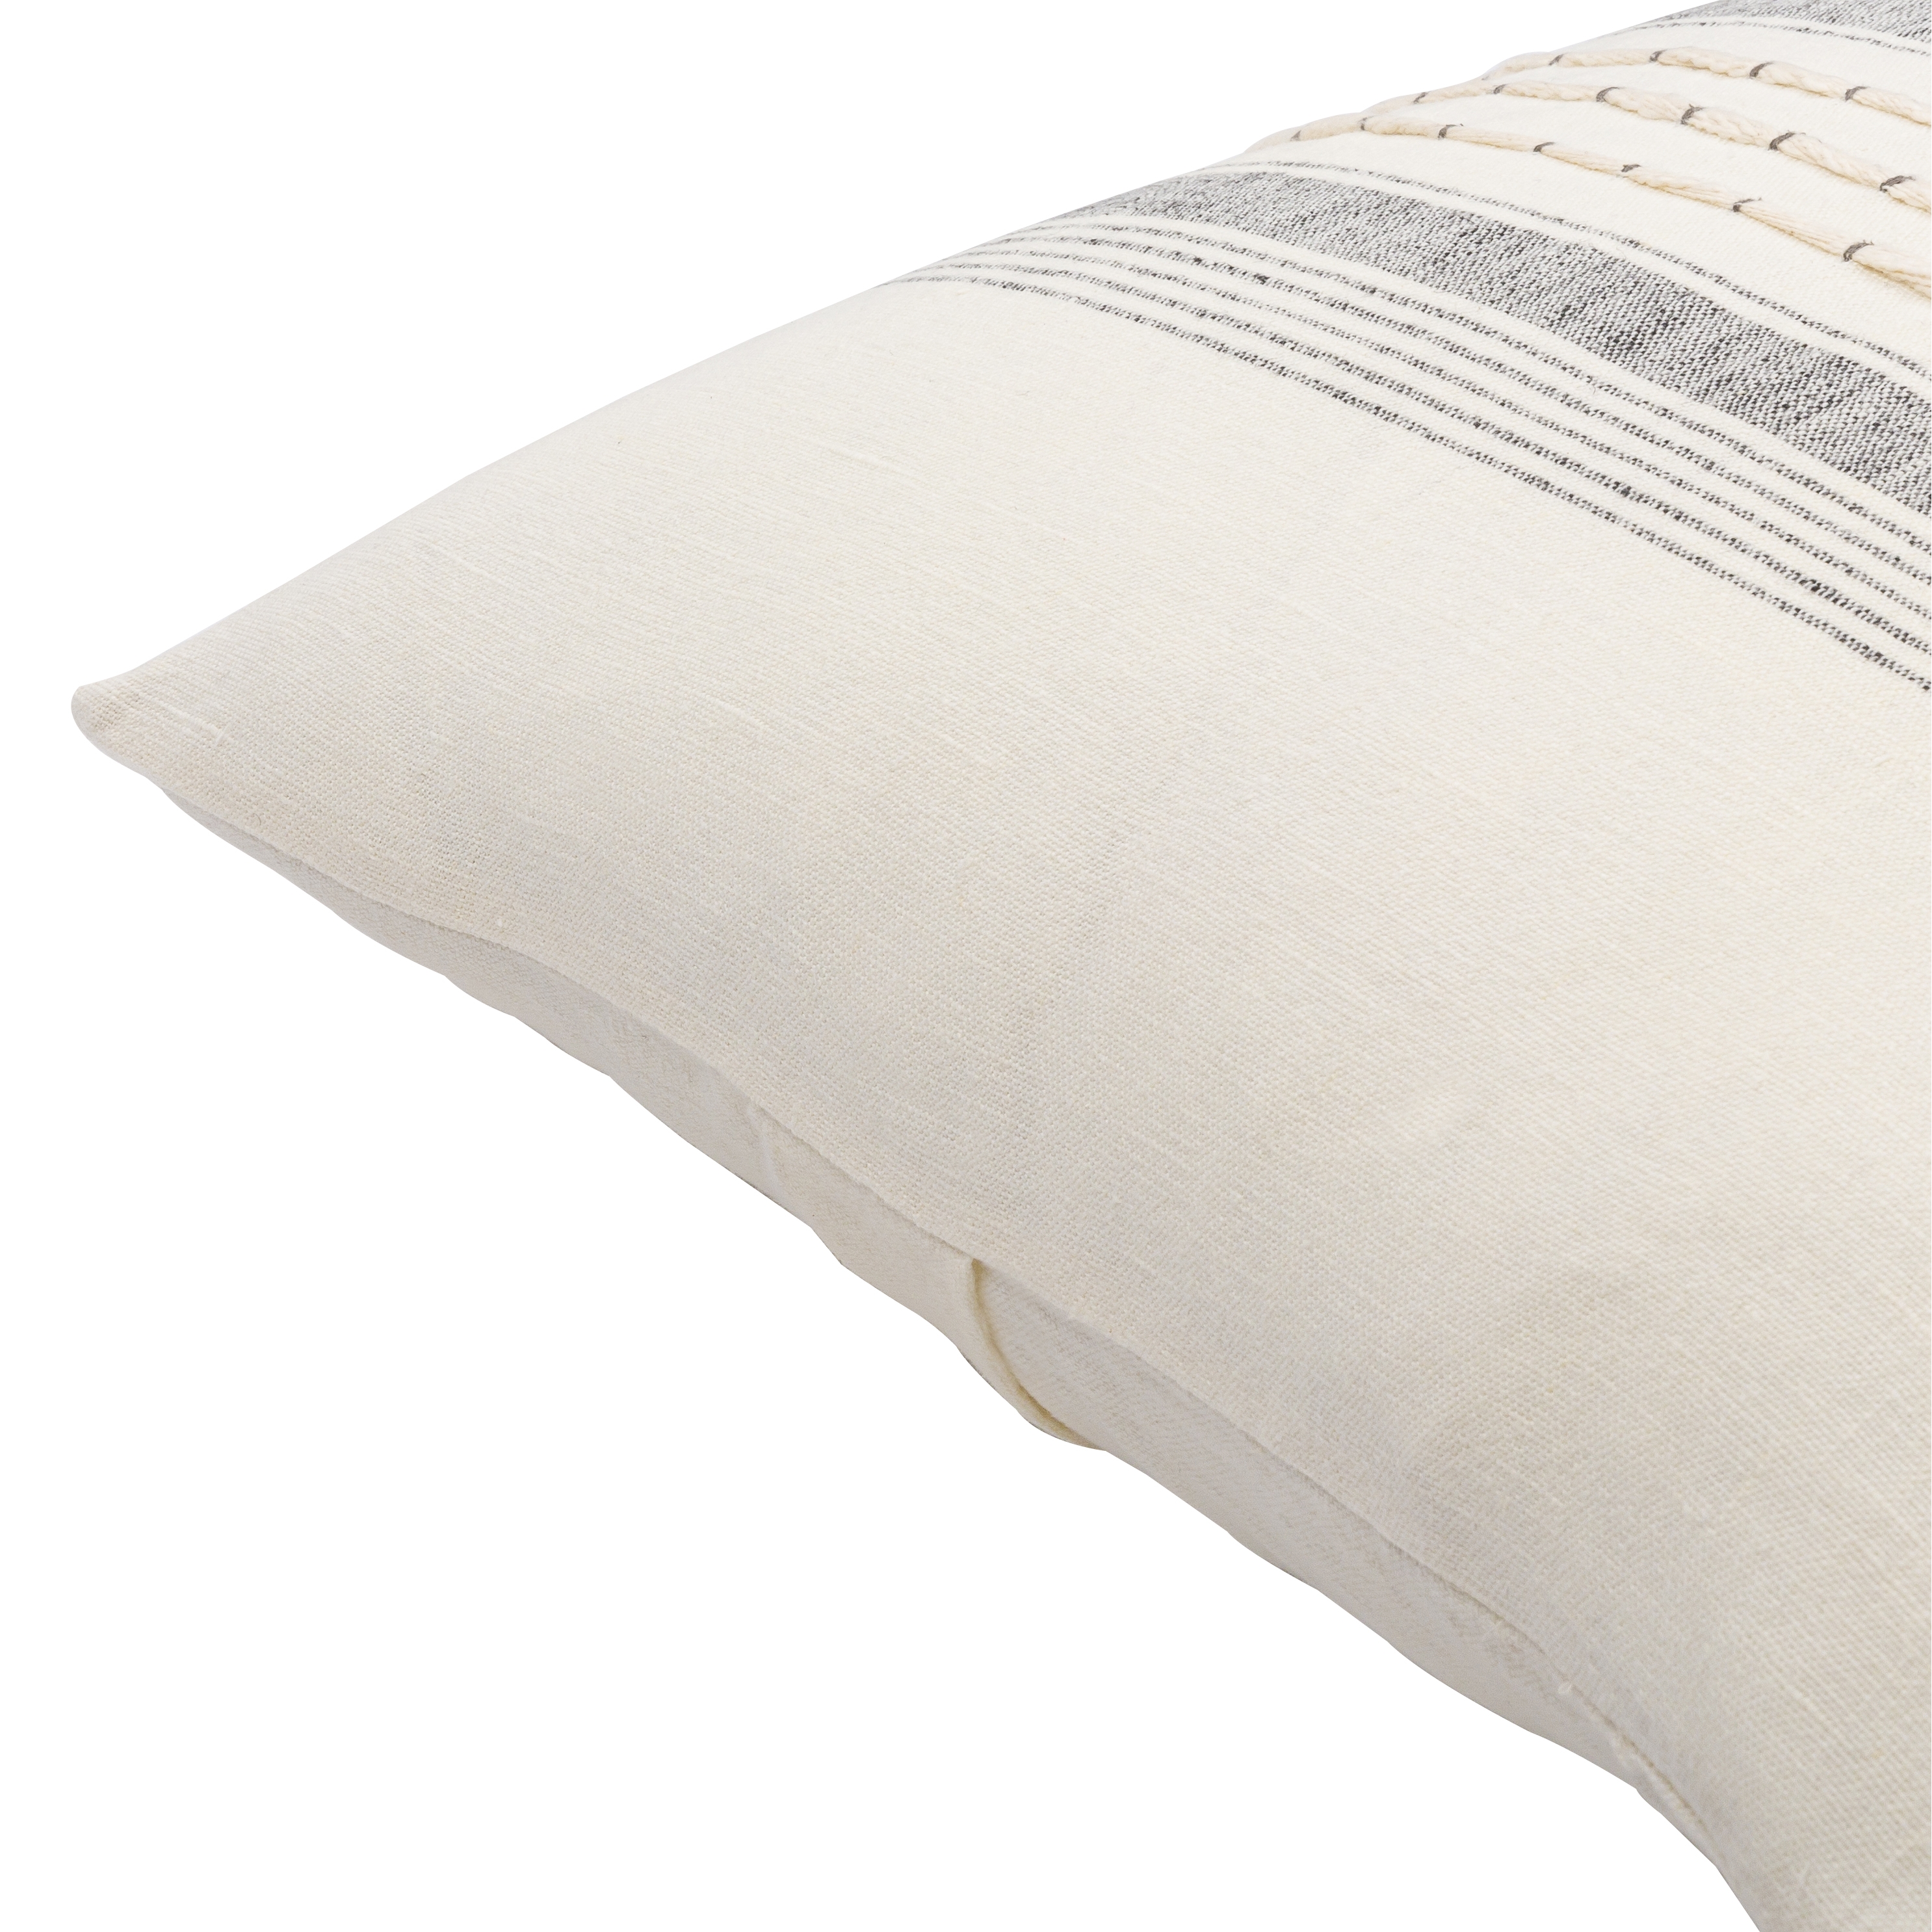 Linen Stripe Embellished Throw Pillow, 20" x 20", with poly insert - Image 1